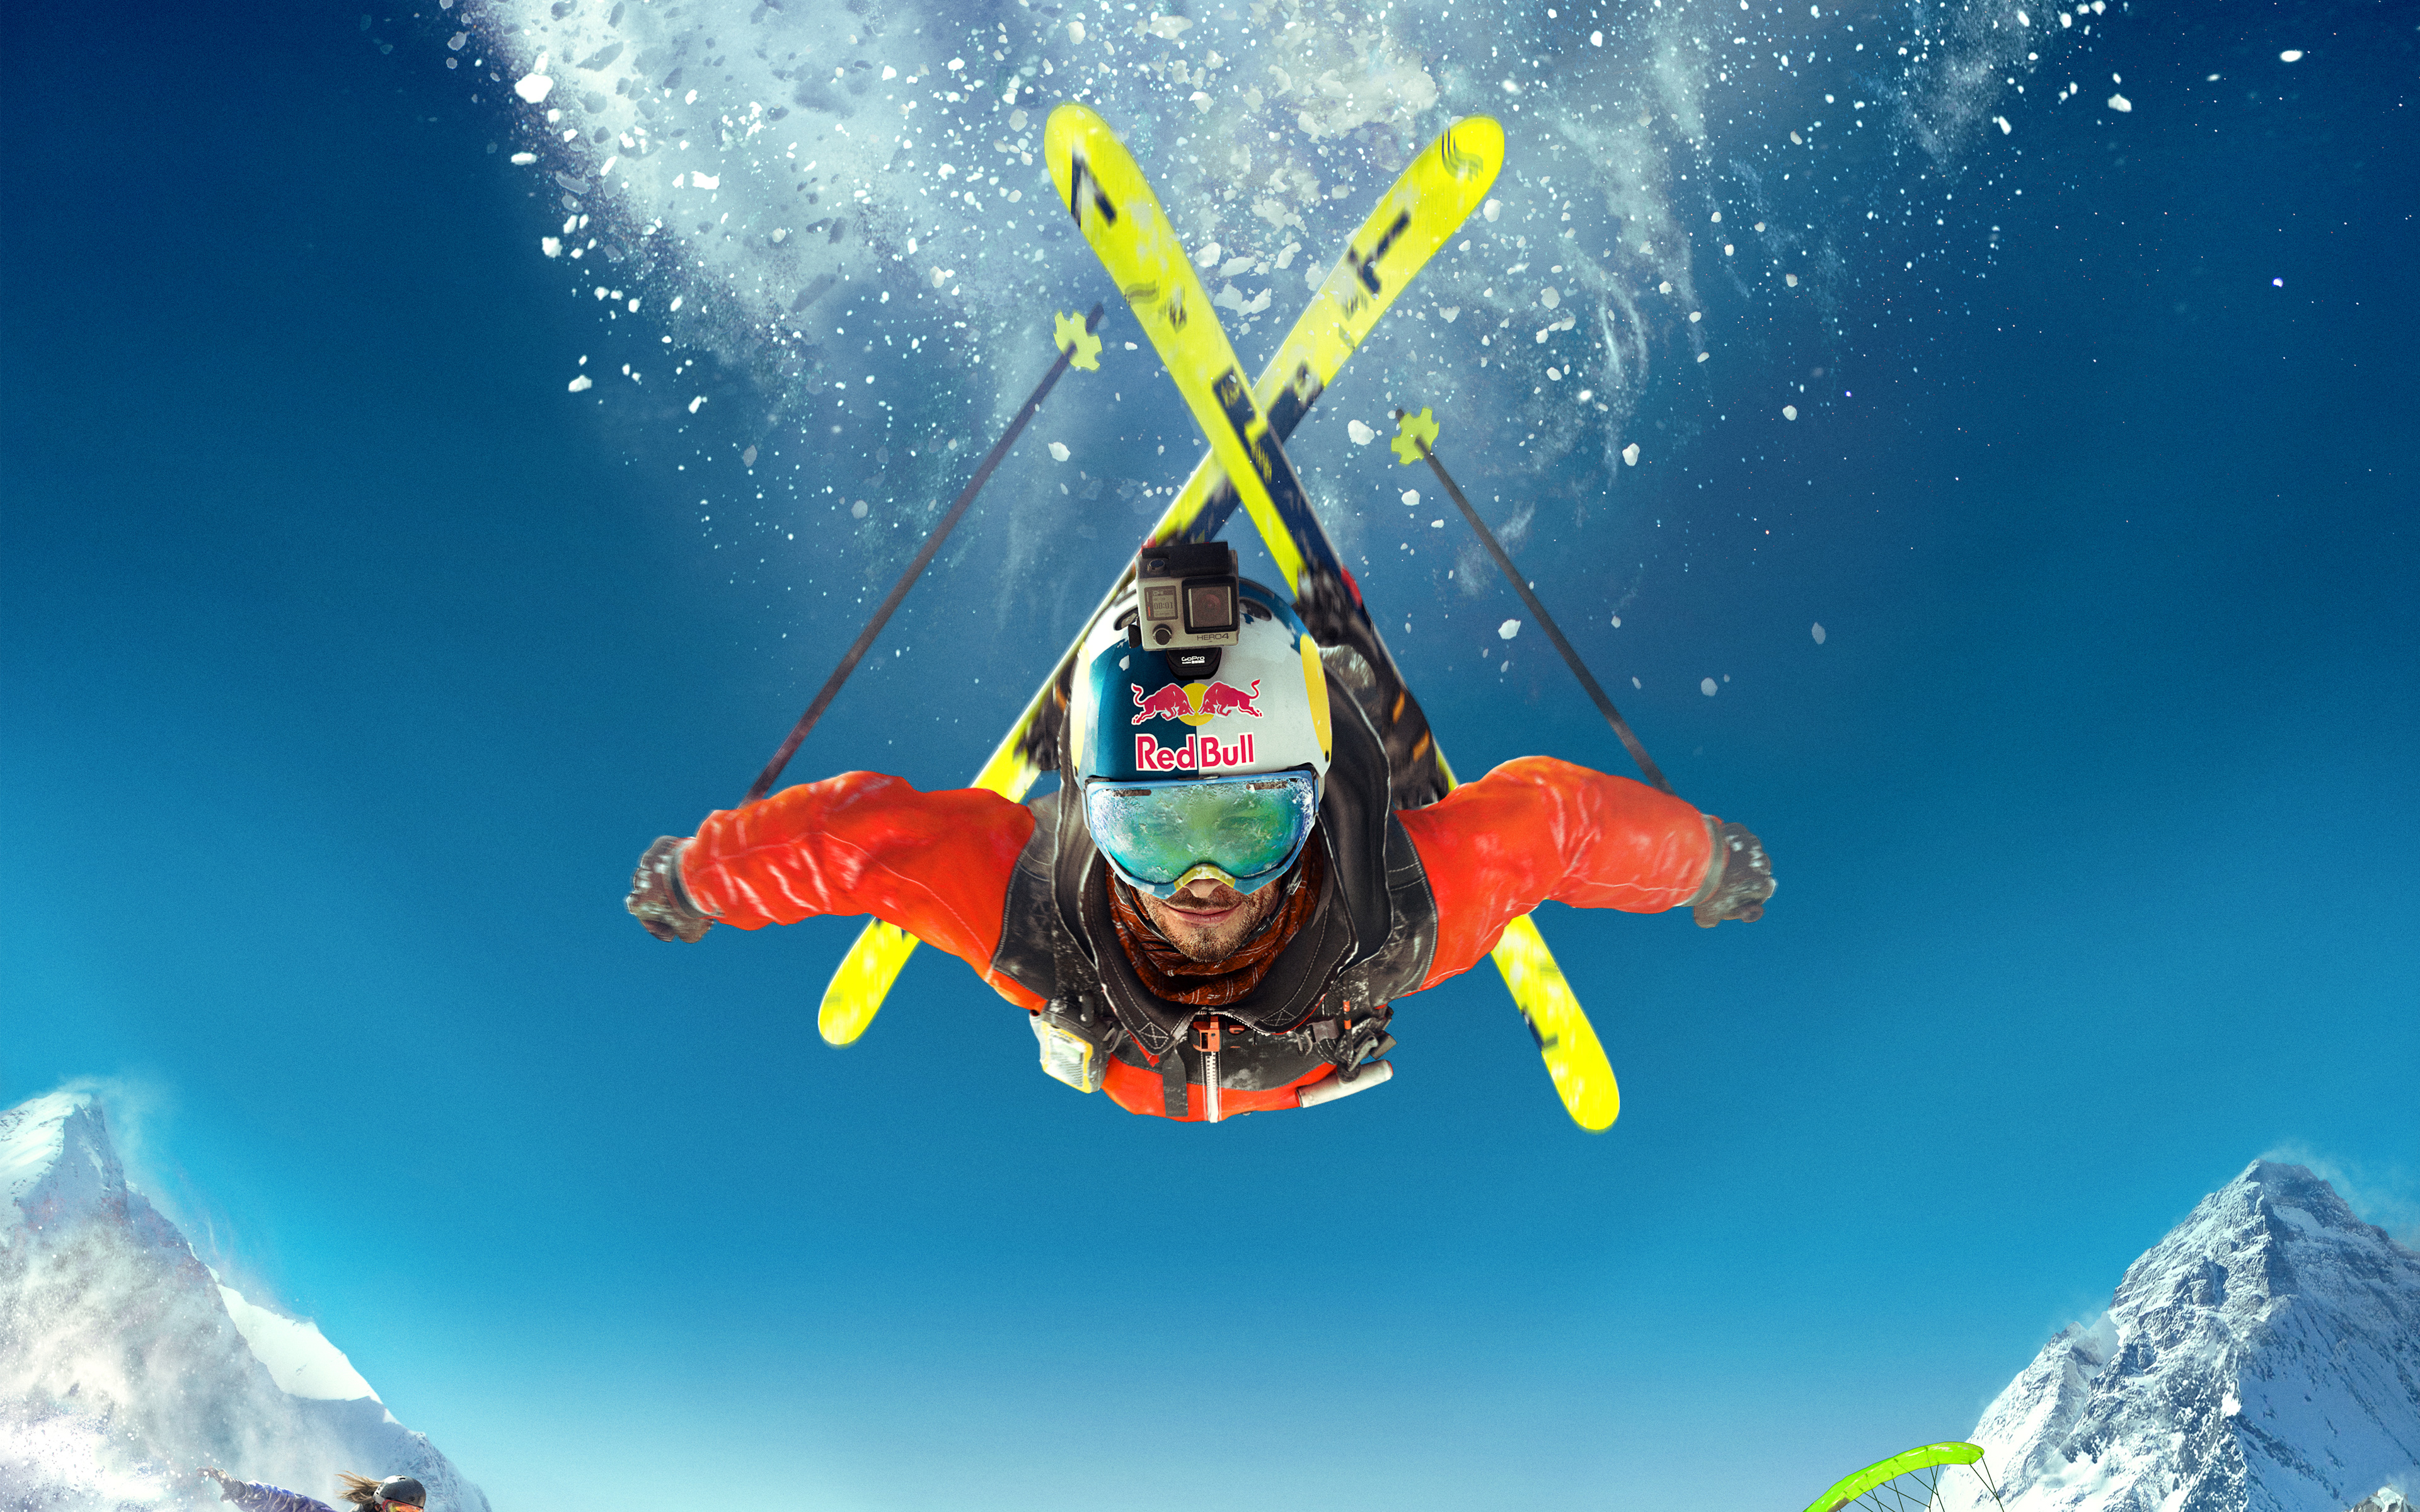 Skiing k wallpapers for your desktop or mobile screen free and easy to download